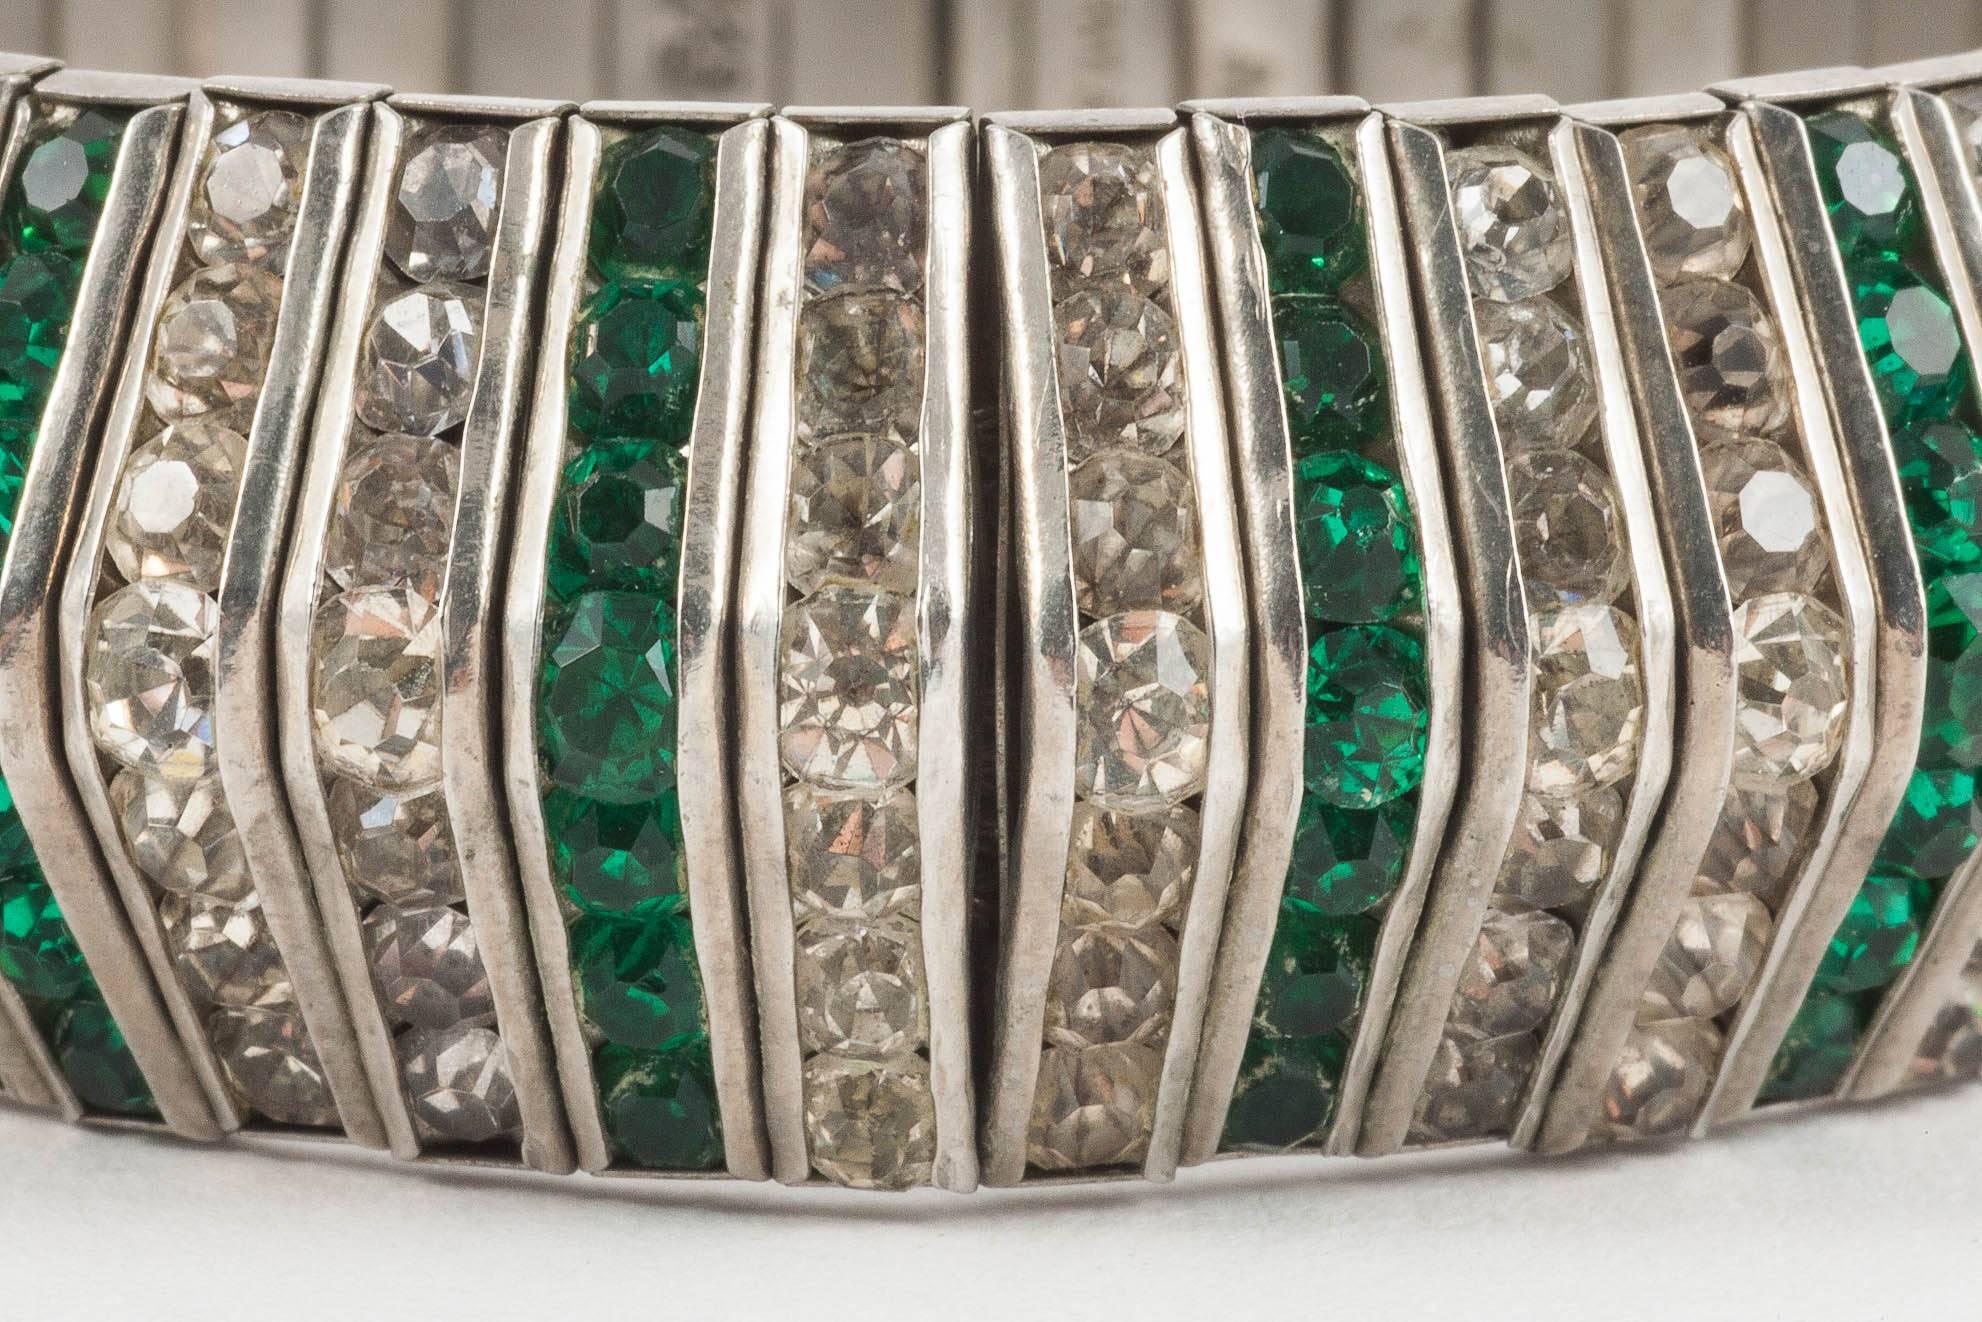 Strong and stylised emerald and clear paste articulated bracelet, signed D.R.G.M, made in Germany in the 1930s, with hidden clasp. This is a fine example and a high style  Art Deco piece - jewellery bearing this mark is always wearable and